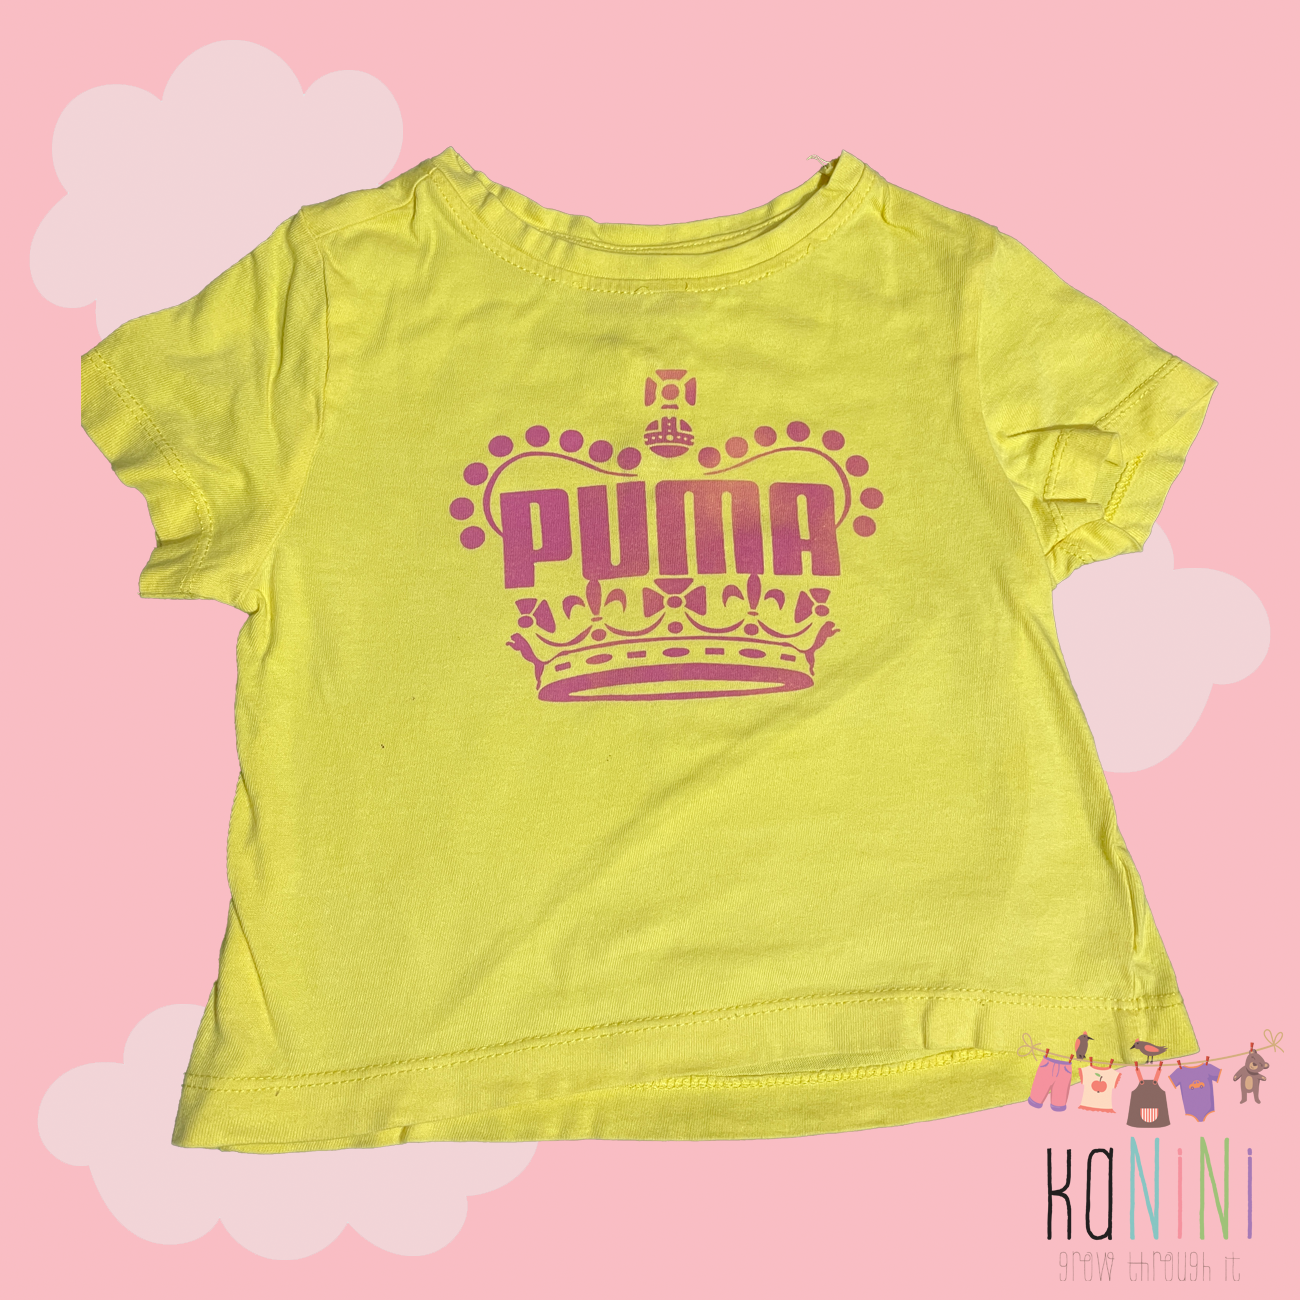 Featured image for “Puma 1 - 2 Years Girls Crown T-Shirt”